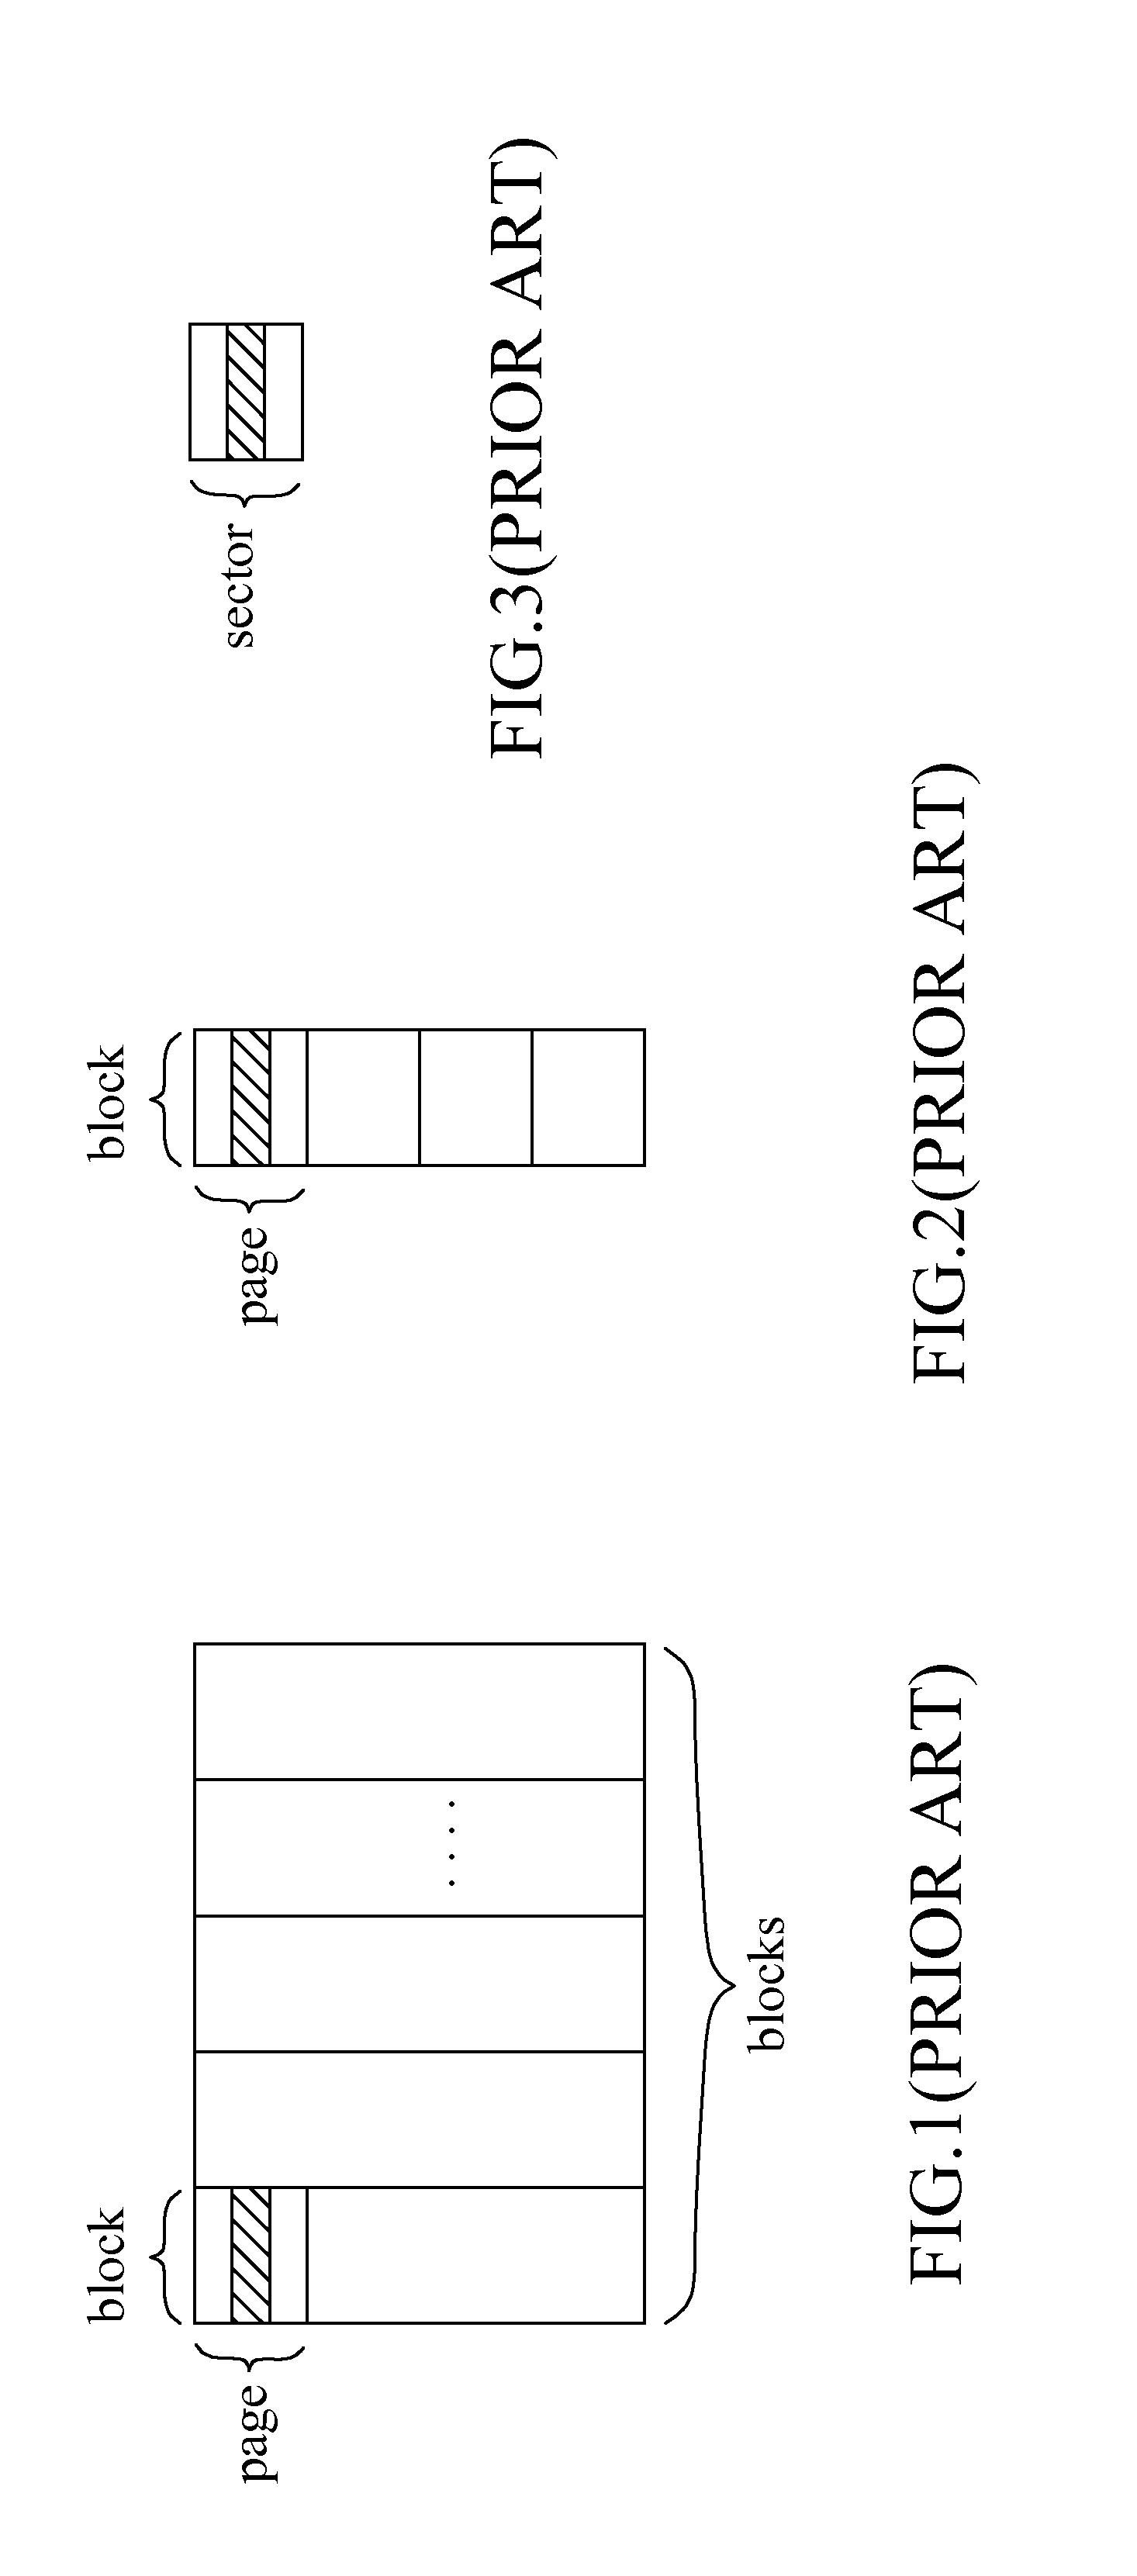 Bit-level memory controller and a method thereof